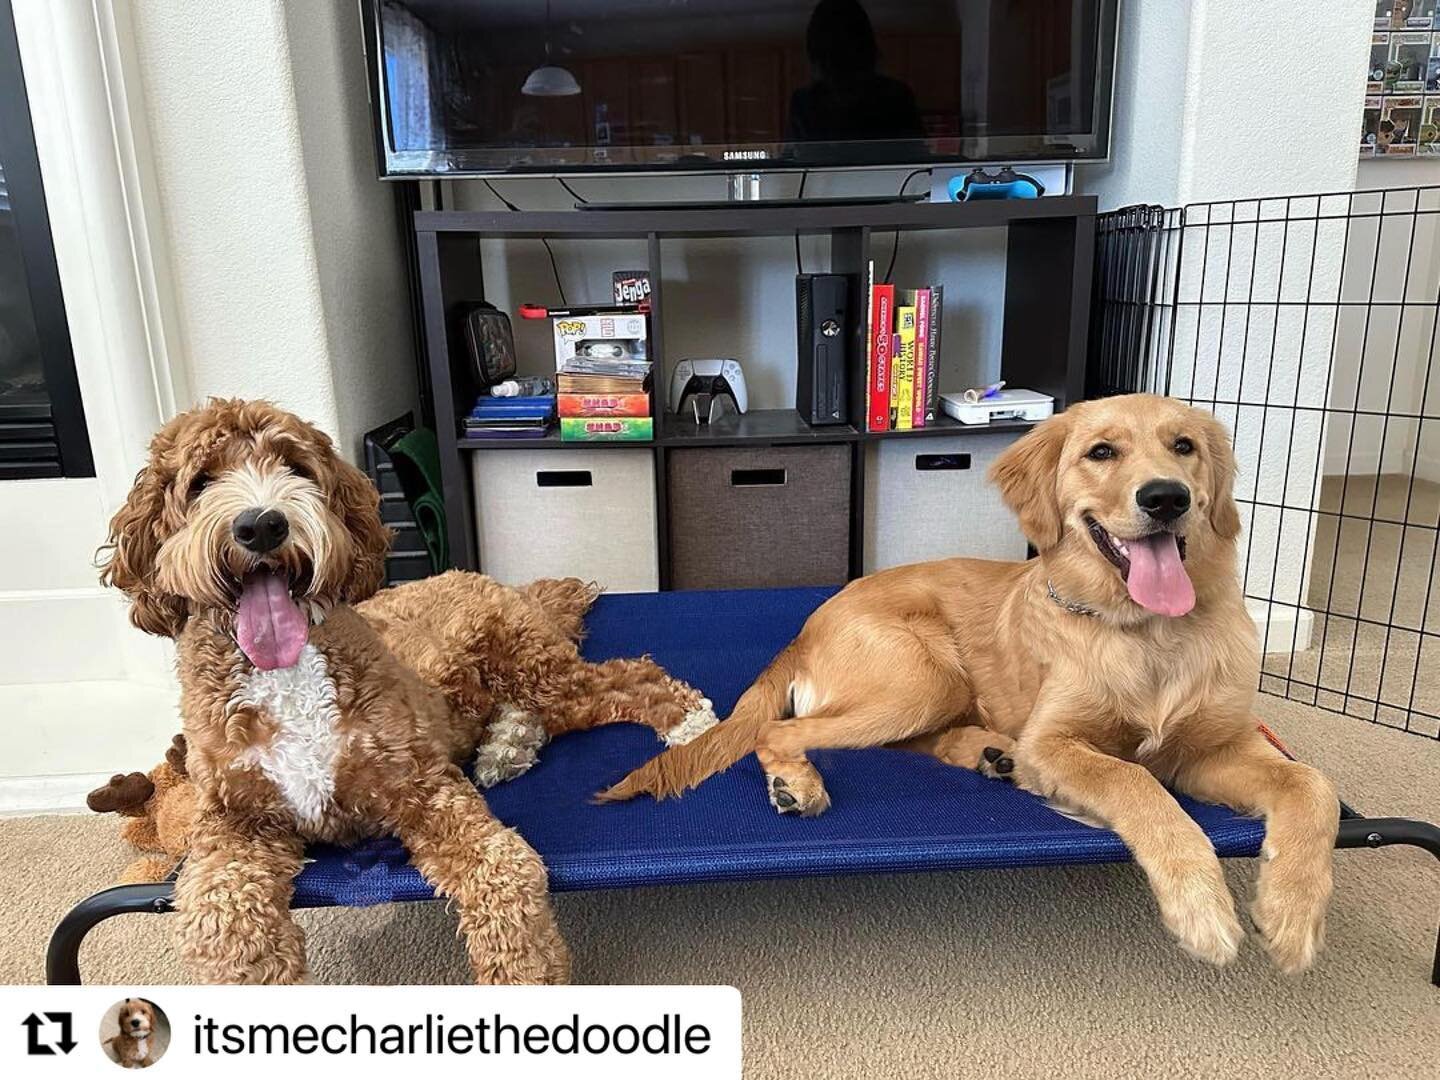 We love our dogs! Once a part of the LDTT Pack, always a part of the LDTT pack. 🐶
&hellip;&hellip;&hellip;&hellip;&hellip;&hellip;&hellip;&hellip;&hellip;&hellip;&hellip;&hellip;&hellip;&hellip;&hellip;&hellip;&hellip;.
#repost @itsmecharliethedoodl